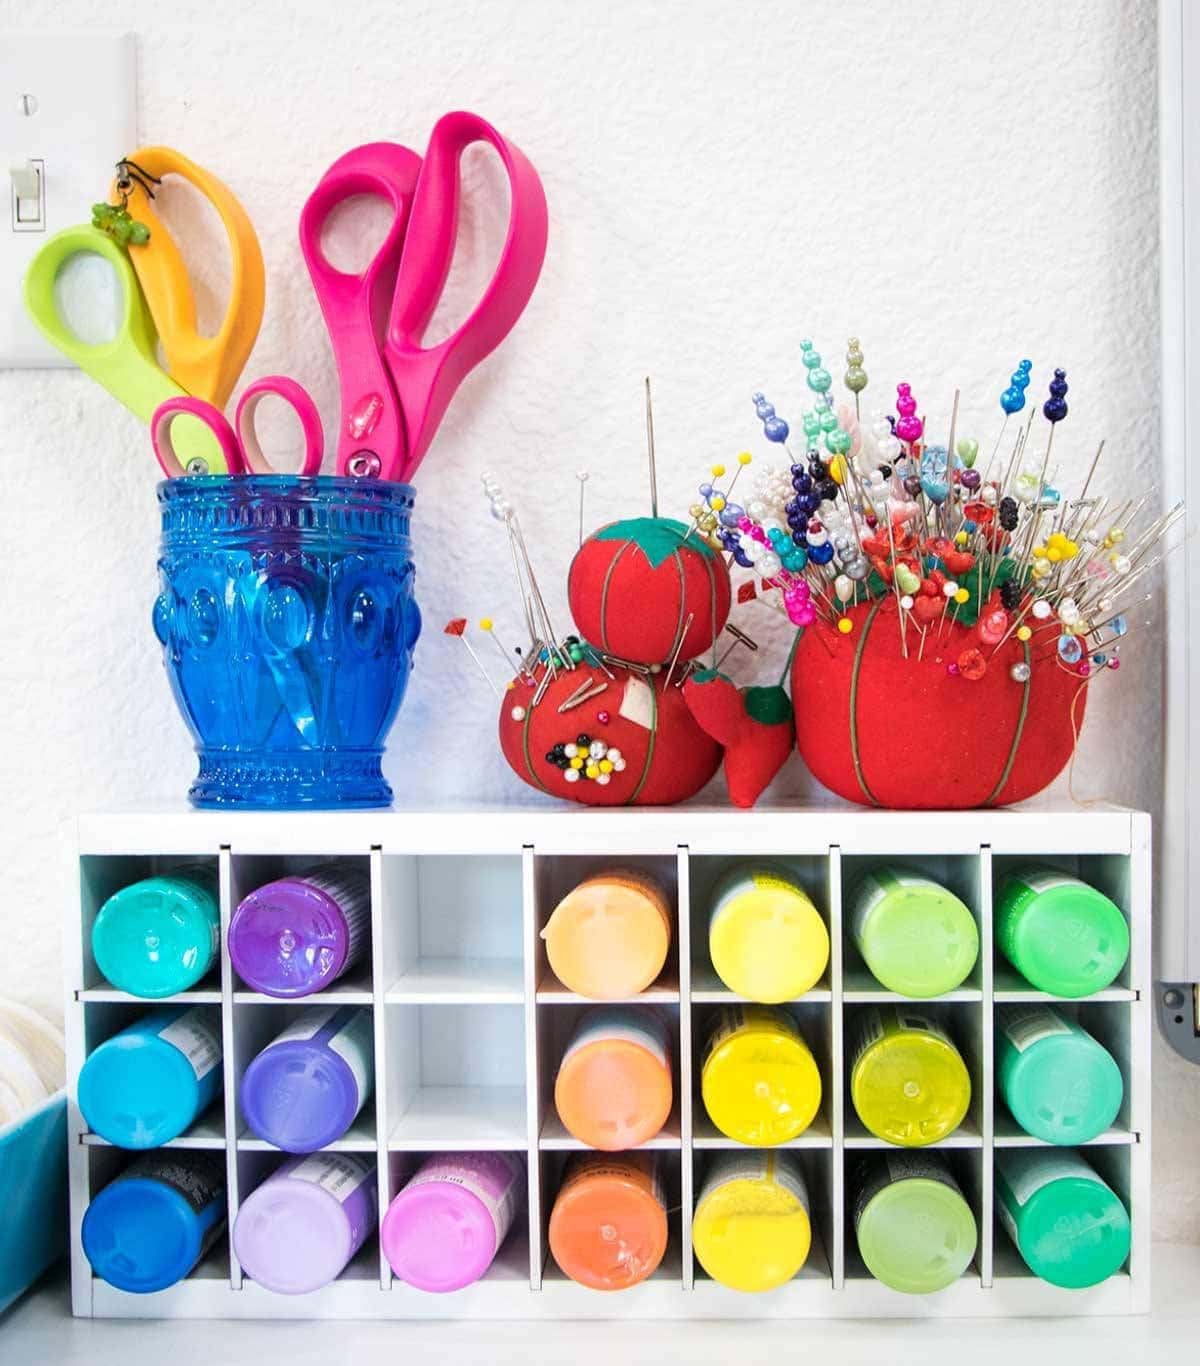 Think of your craft supplies as decor and storage How to Set Up a Small Space via Smart Fun DIY Jenna Kate at Home